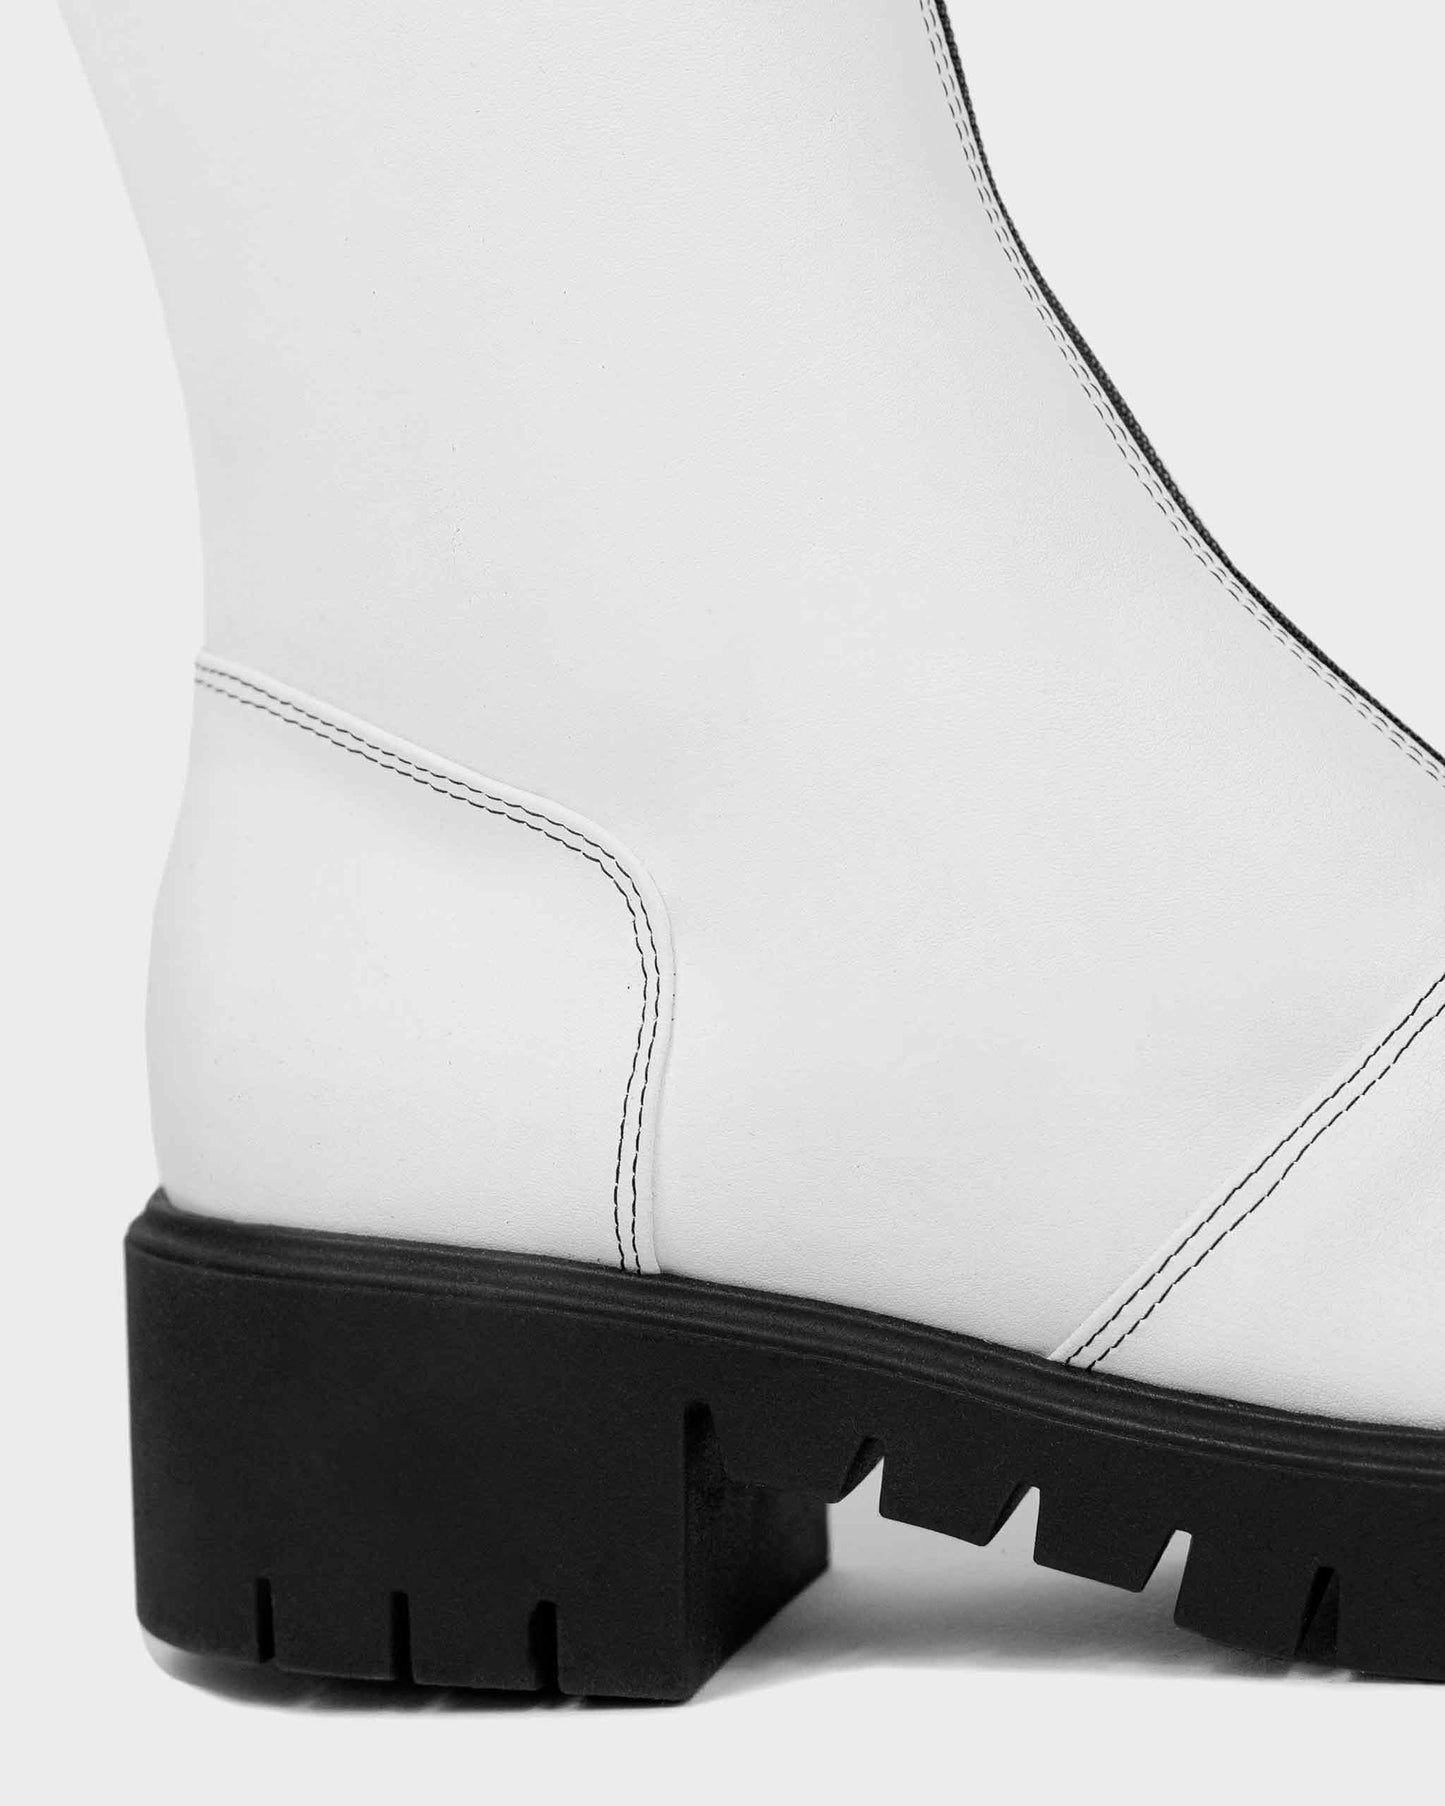 Cyber Boots White cactus leather ankle boots